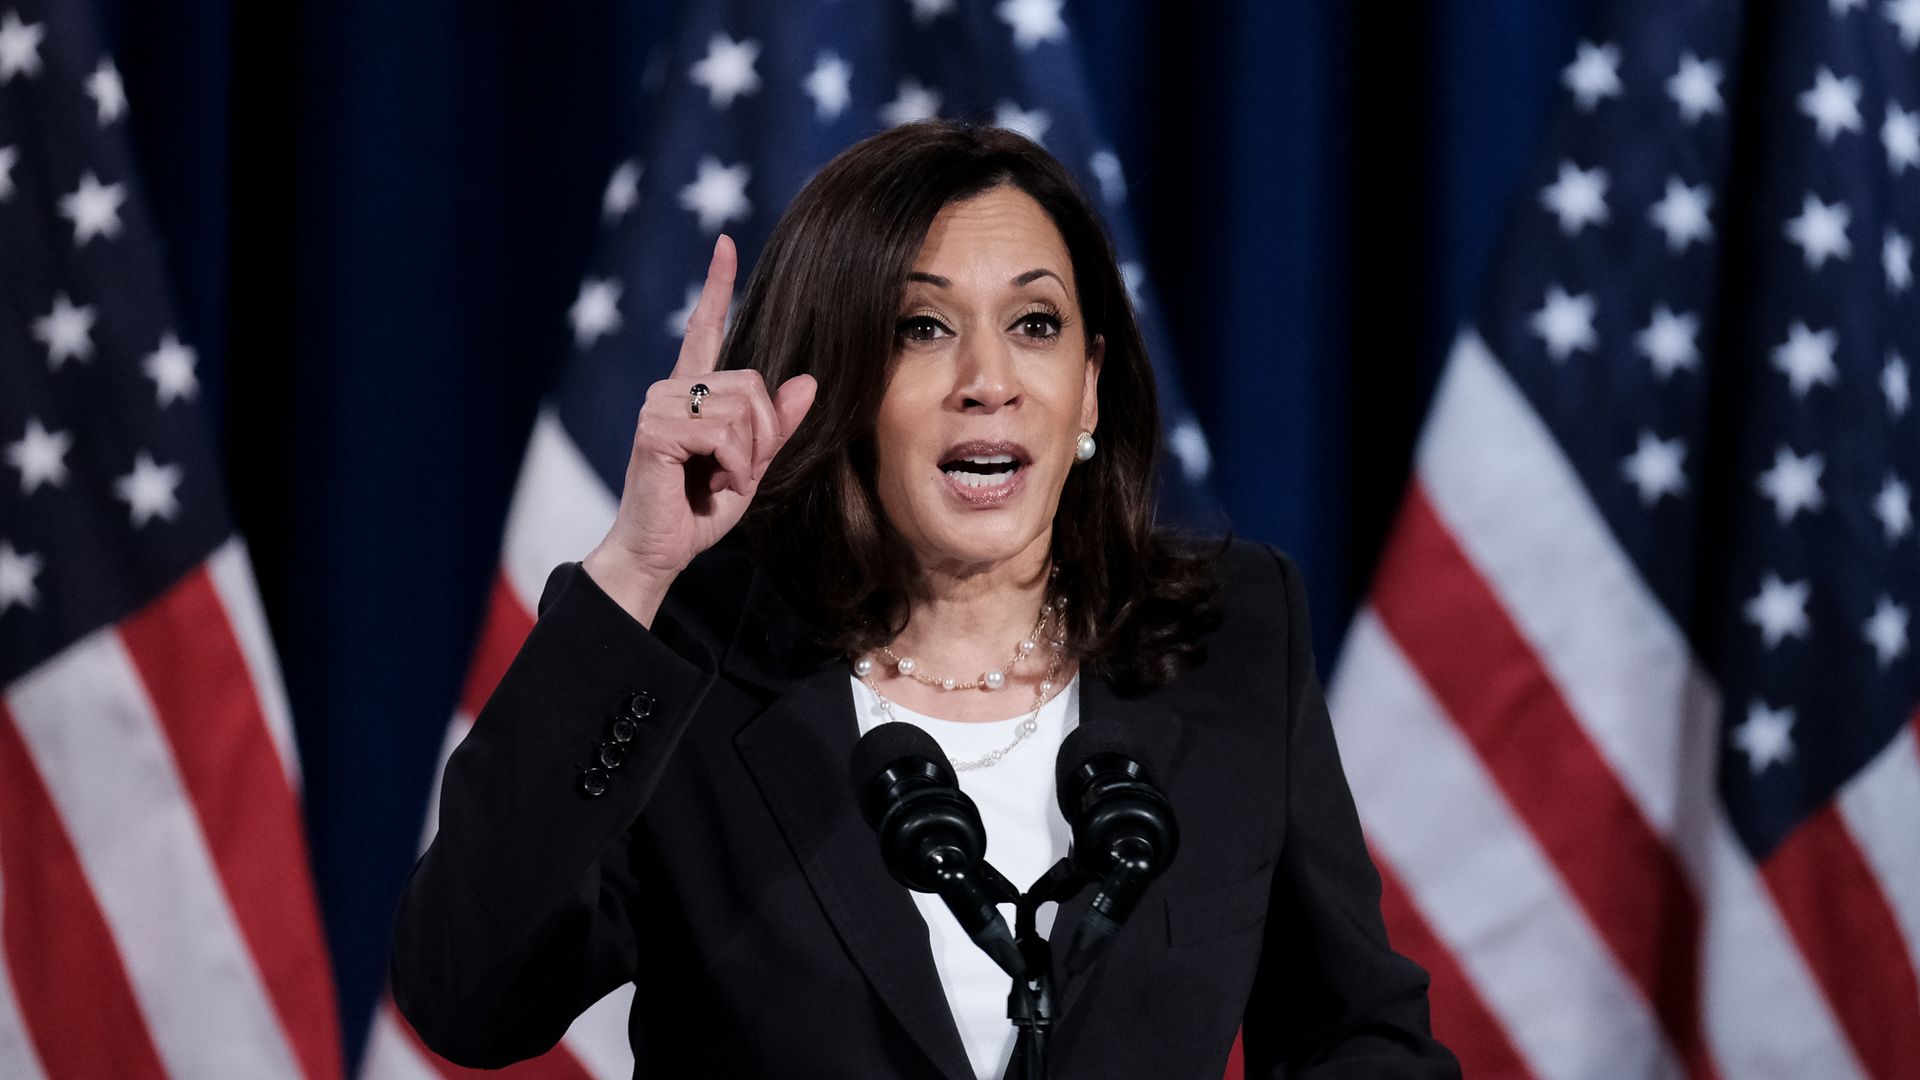 Democratic Vice Presidential nominee Sen. Kamala Harris (D-CA.), delivers remarks during a campaign event on August 27, 2020 in Washington, DC.